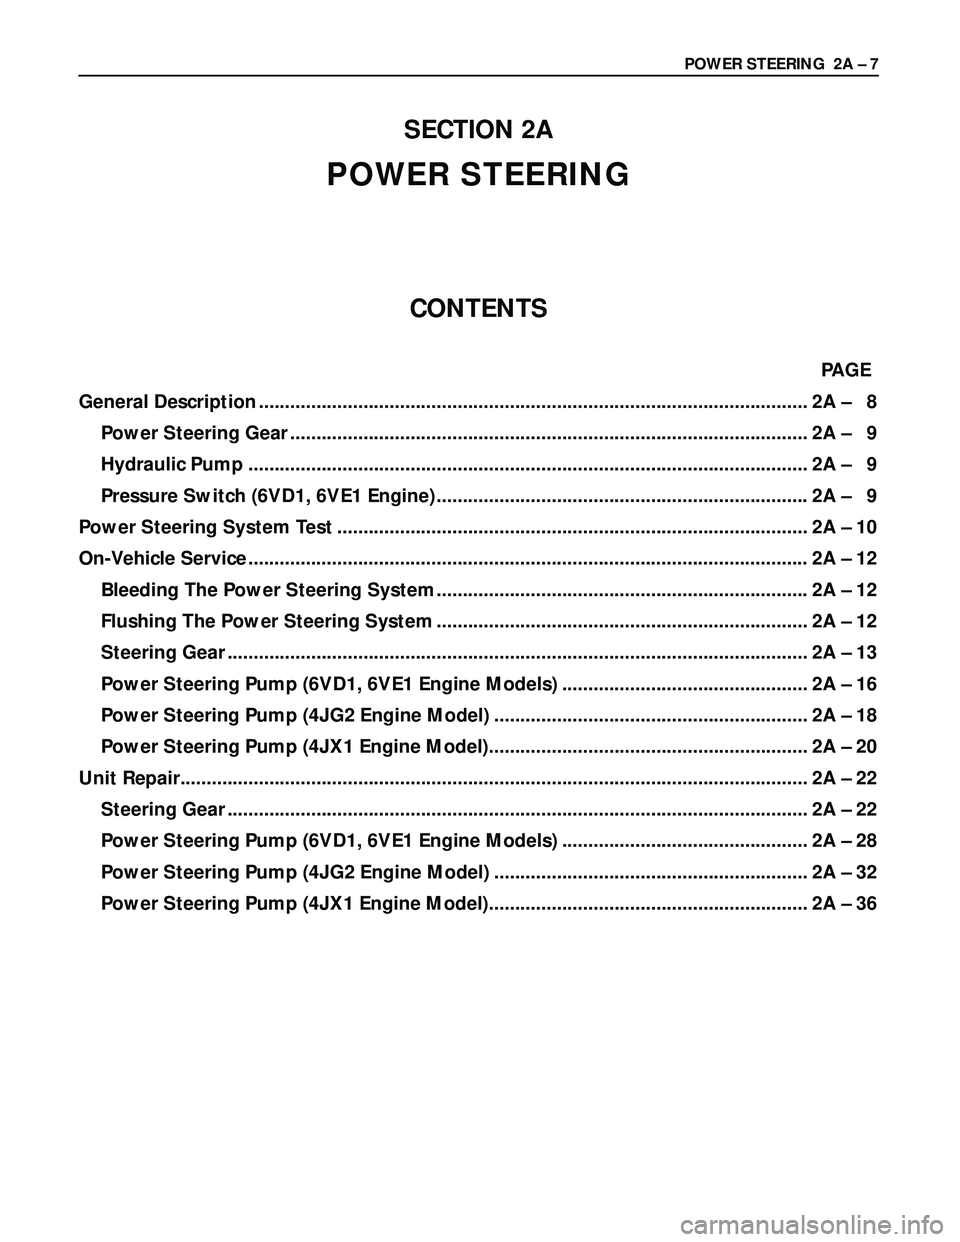 ISUZU TROOPER 1998  Service Repair Manual POWER STEERING  2A – 7
SECTION 2A
POWER STEERING
CONTENTS
PAGE
General Description ......................................................................................................... 2A – 8
